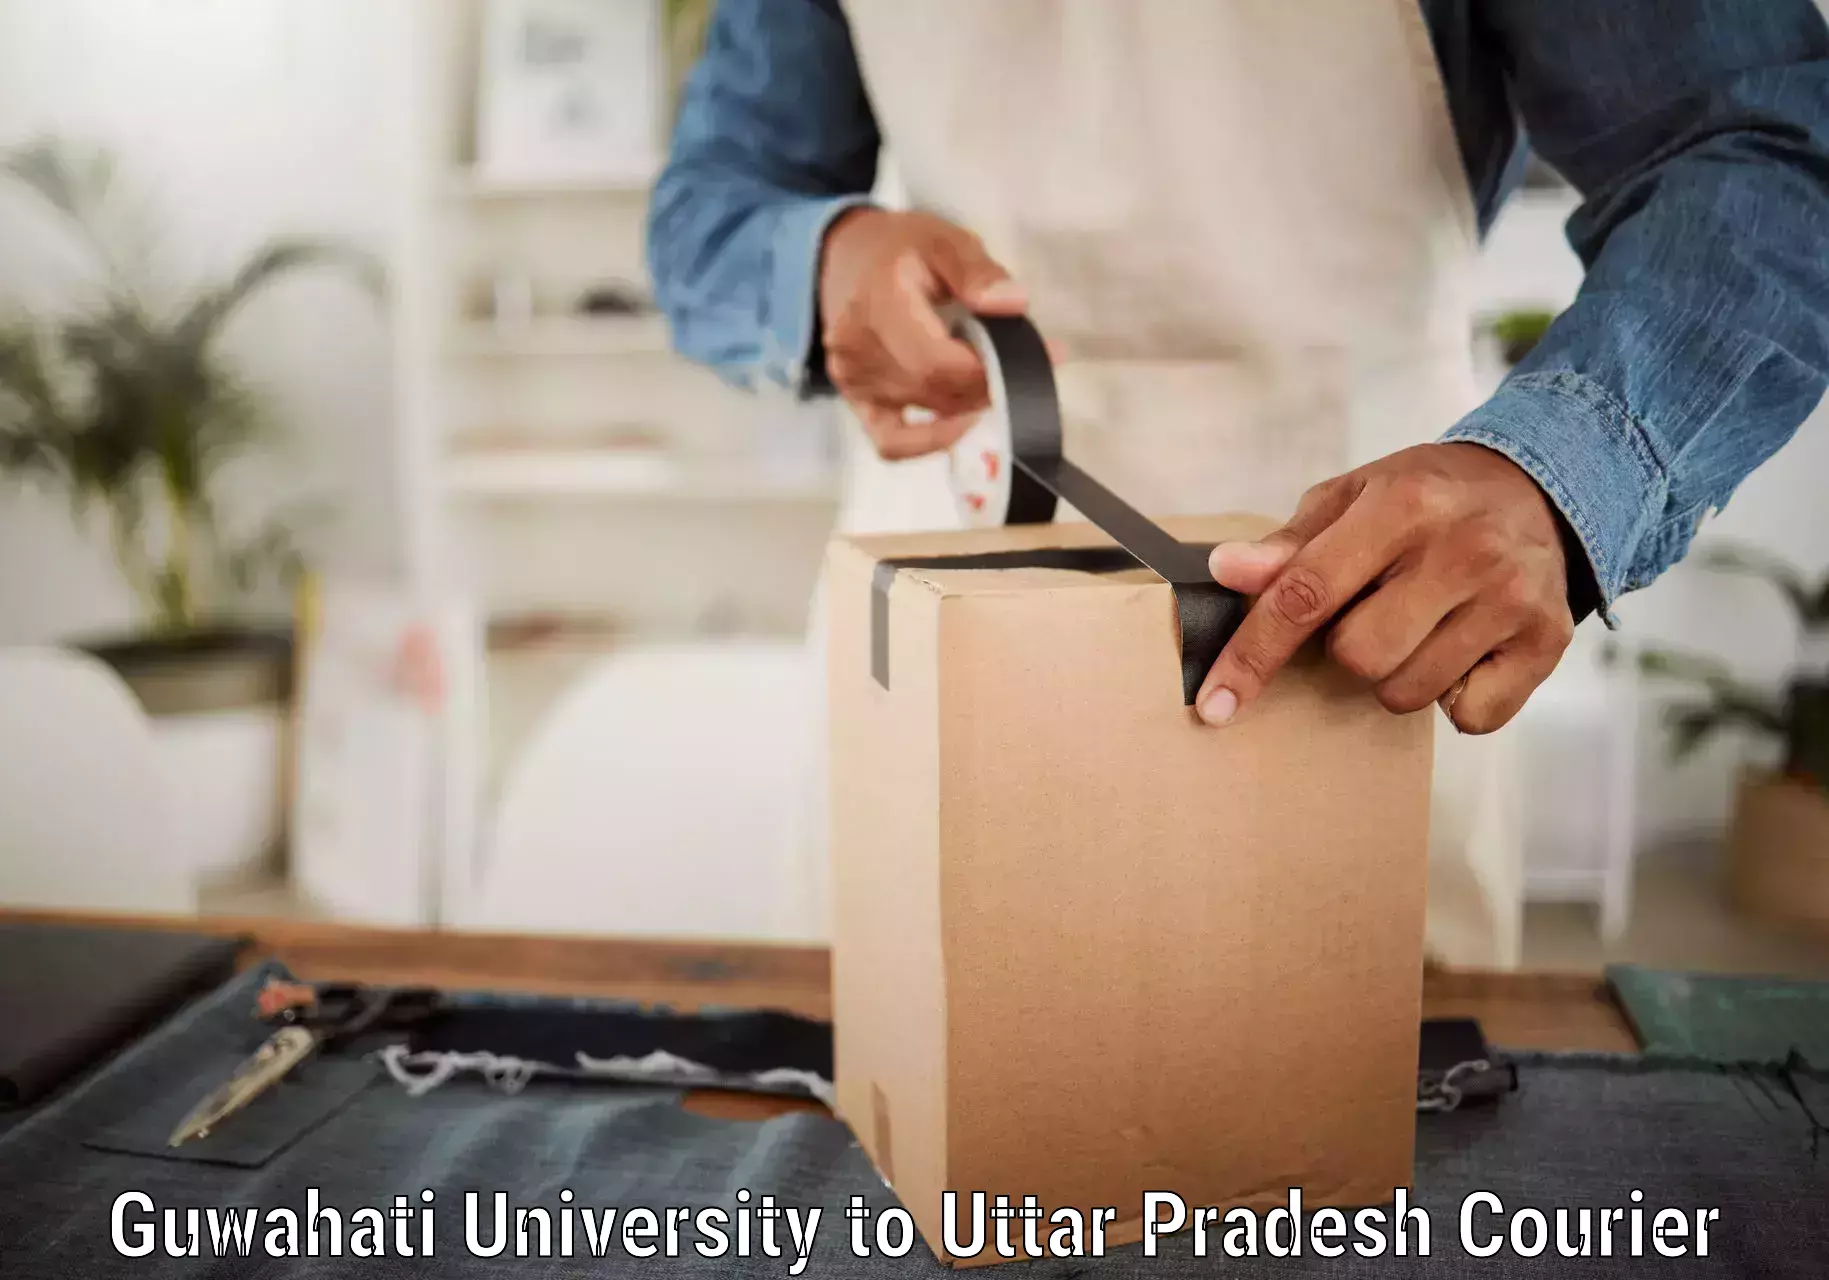 Reliable parcel services Guwahati University to Nagina